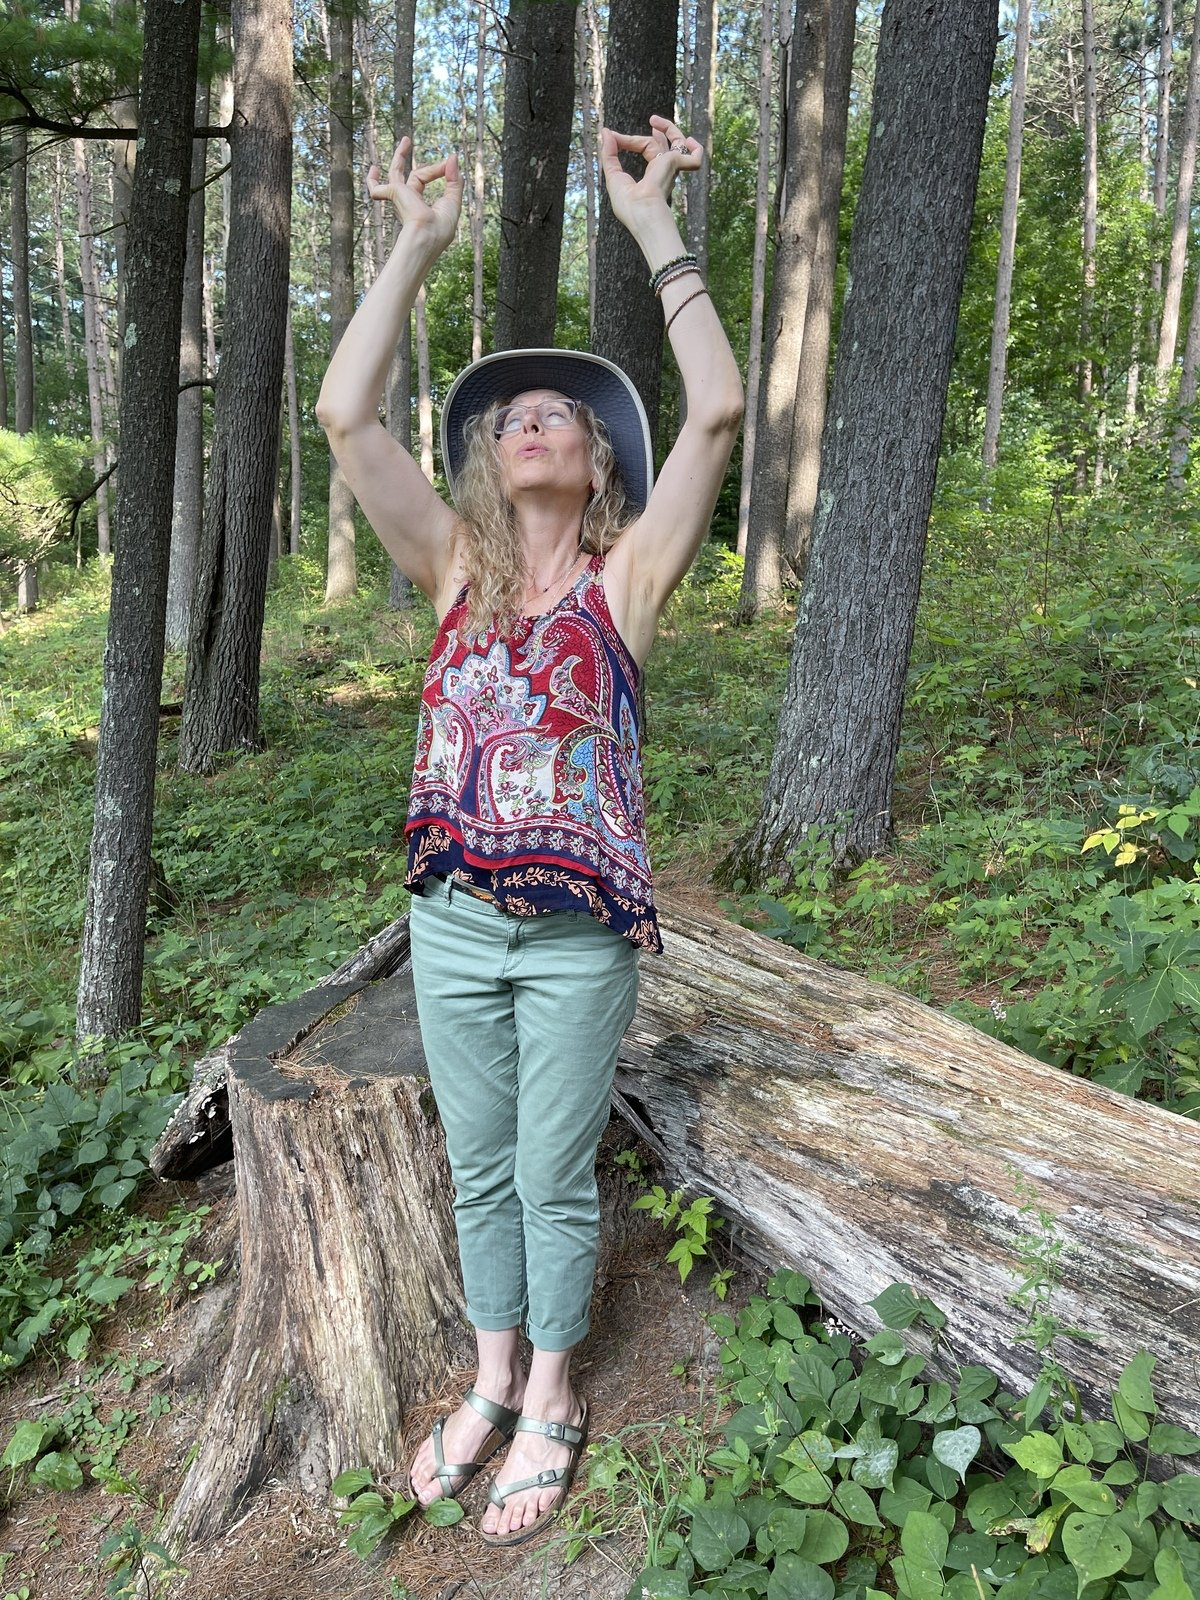 A woman is standing on a tree stump in the woods with her arms in the air.